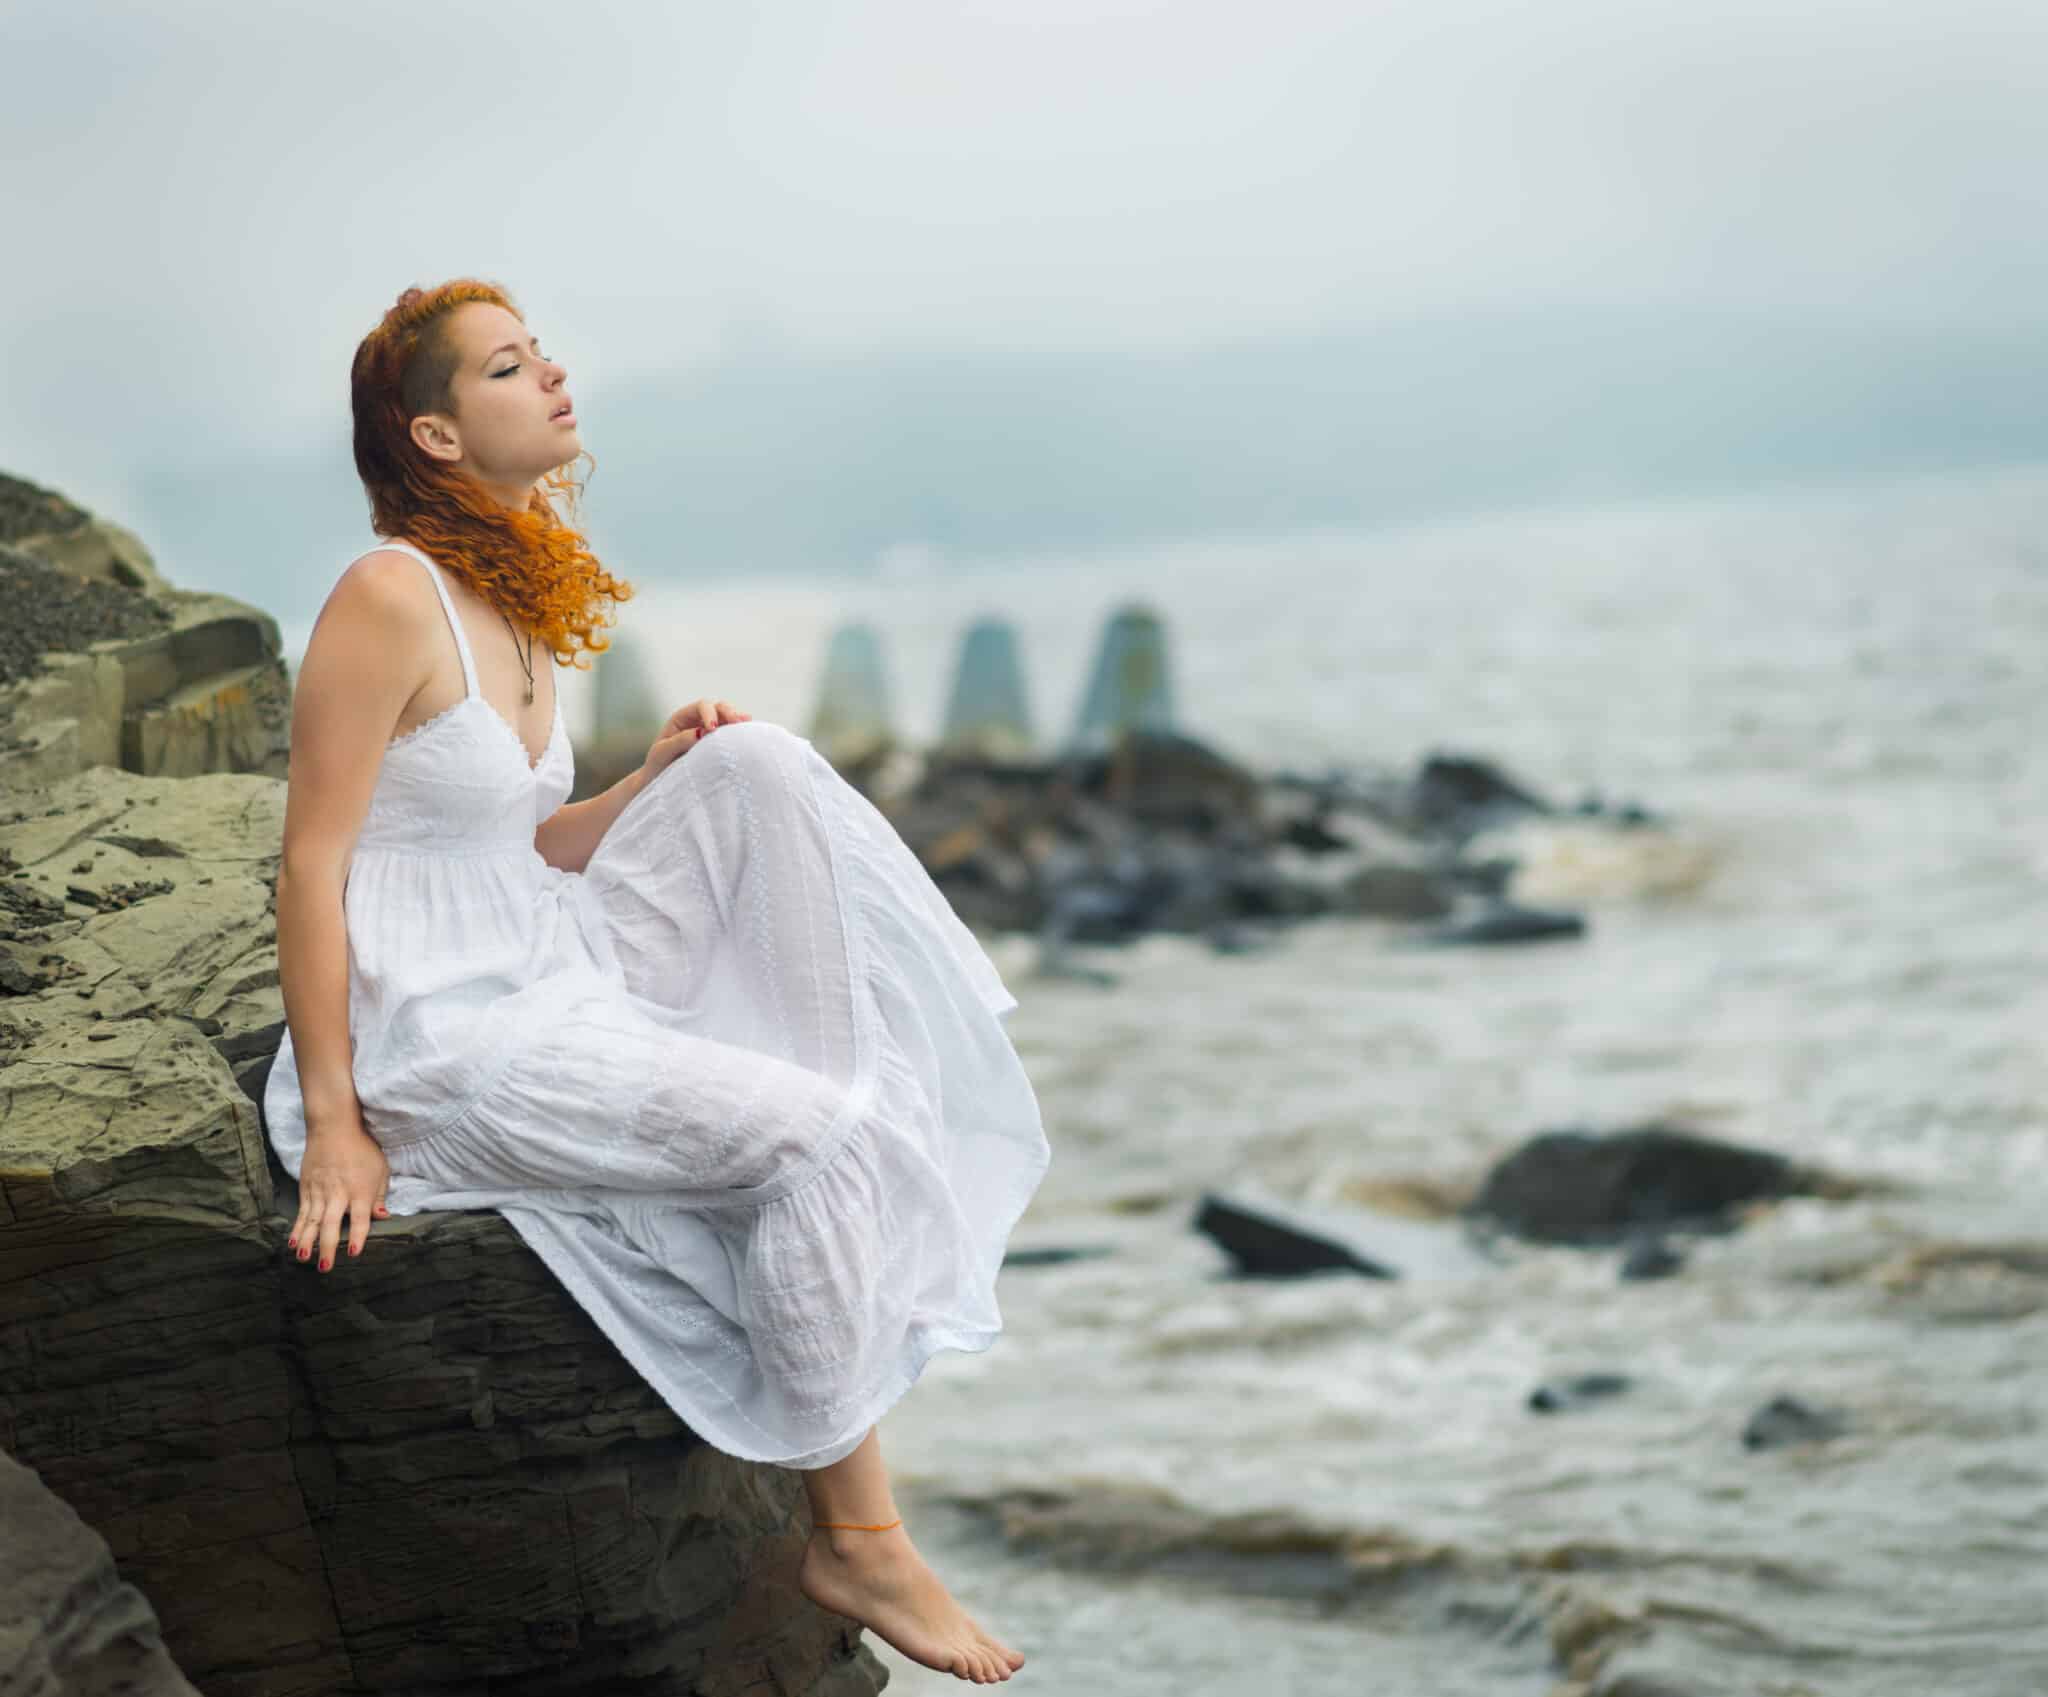 melancholic red-haired woman sitting on the coast on beach